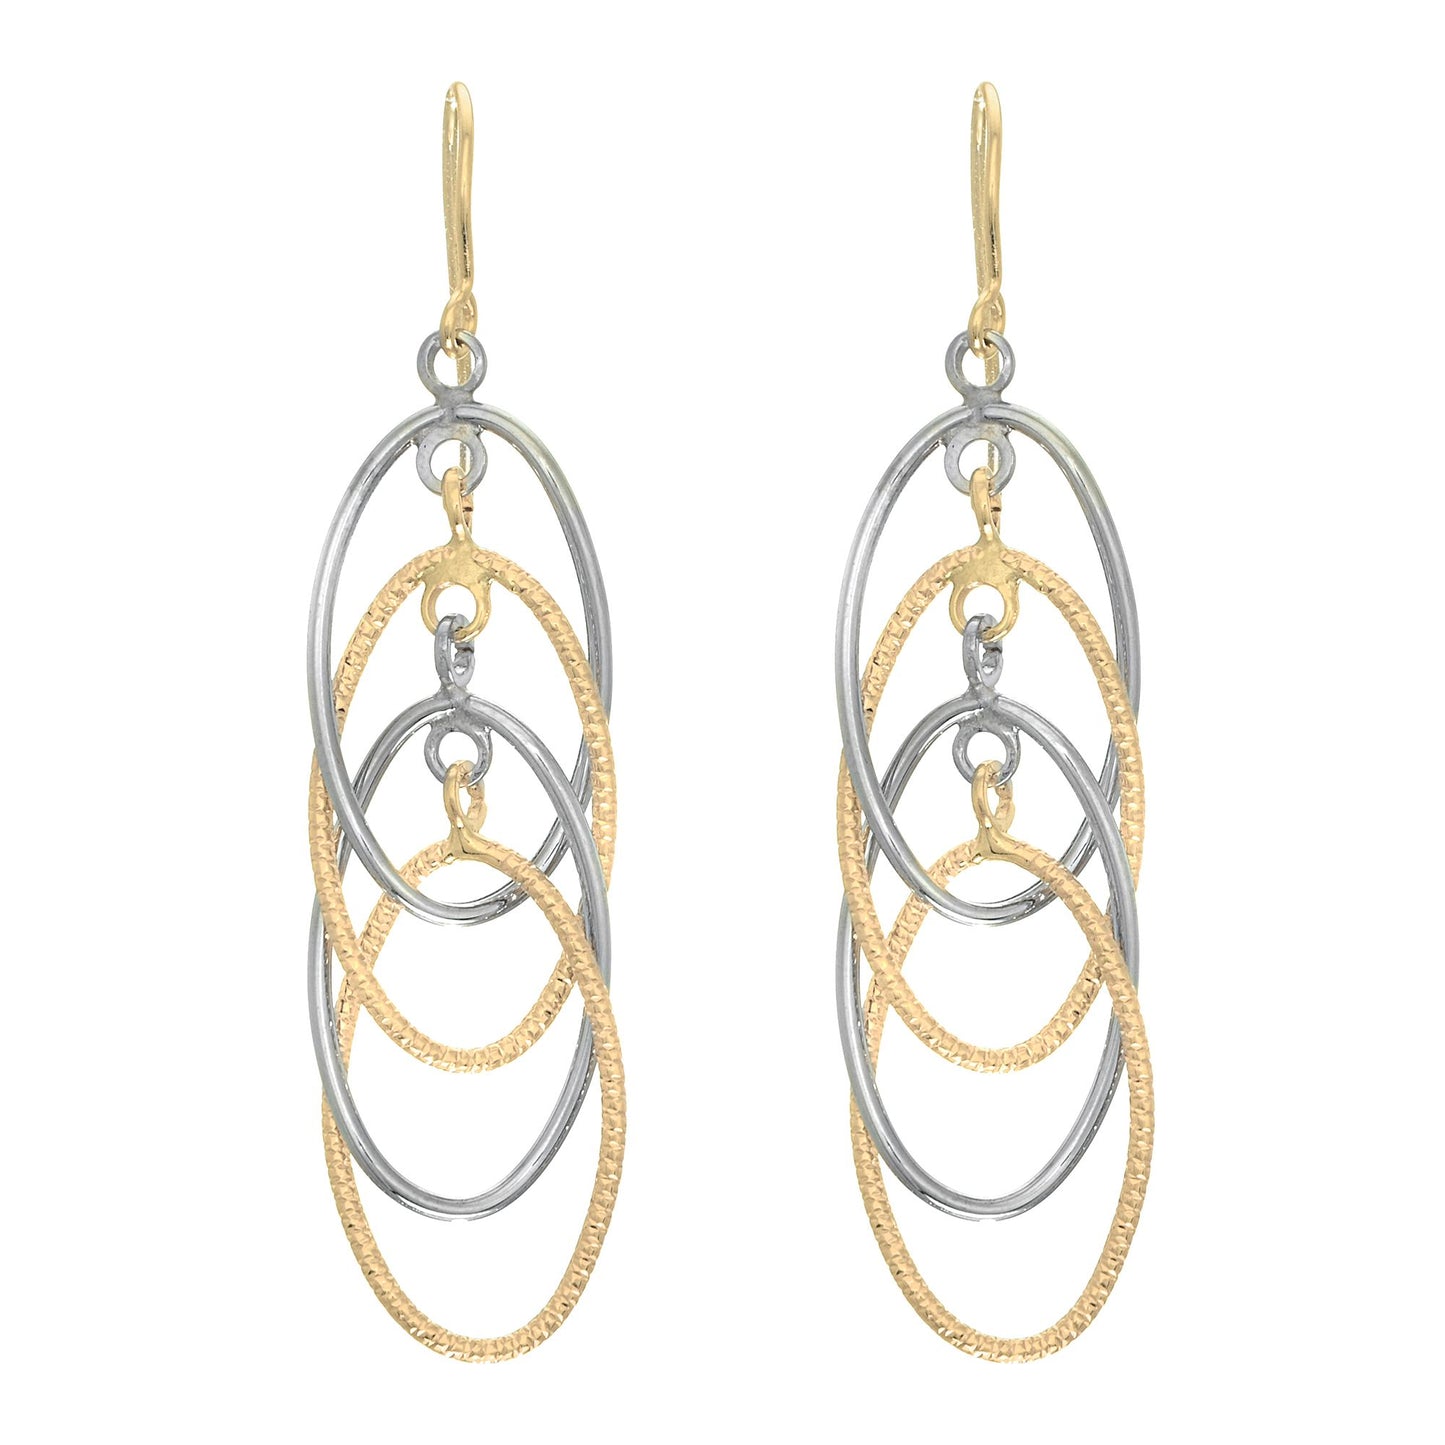 14K White and Yellow Gold Polished Interlocking Oval Dangle Earring